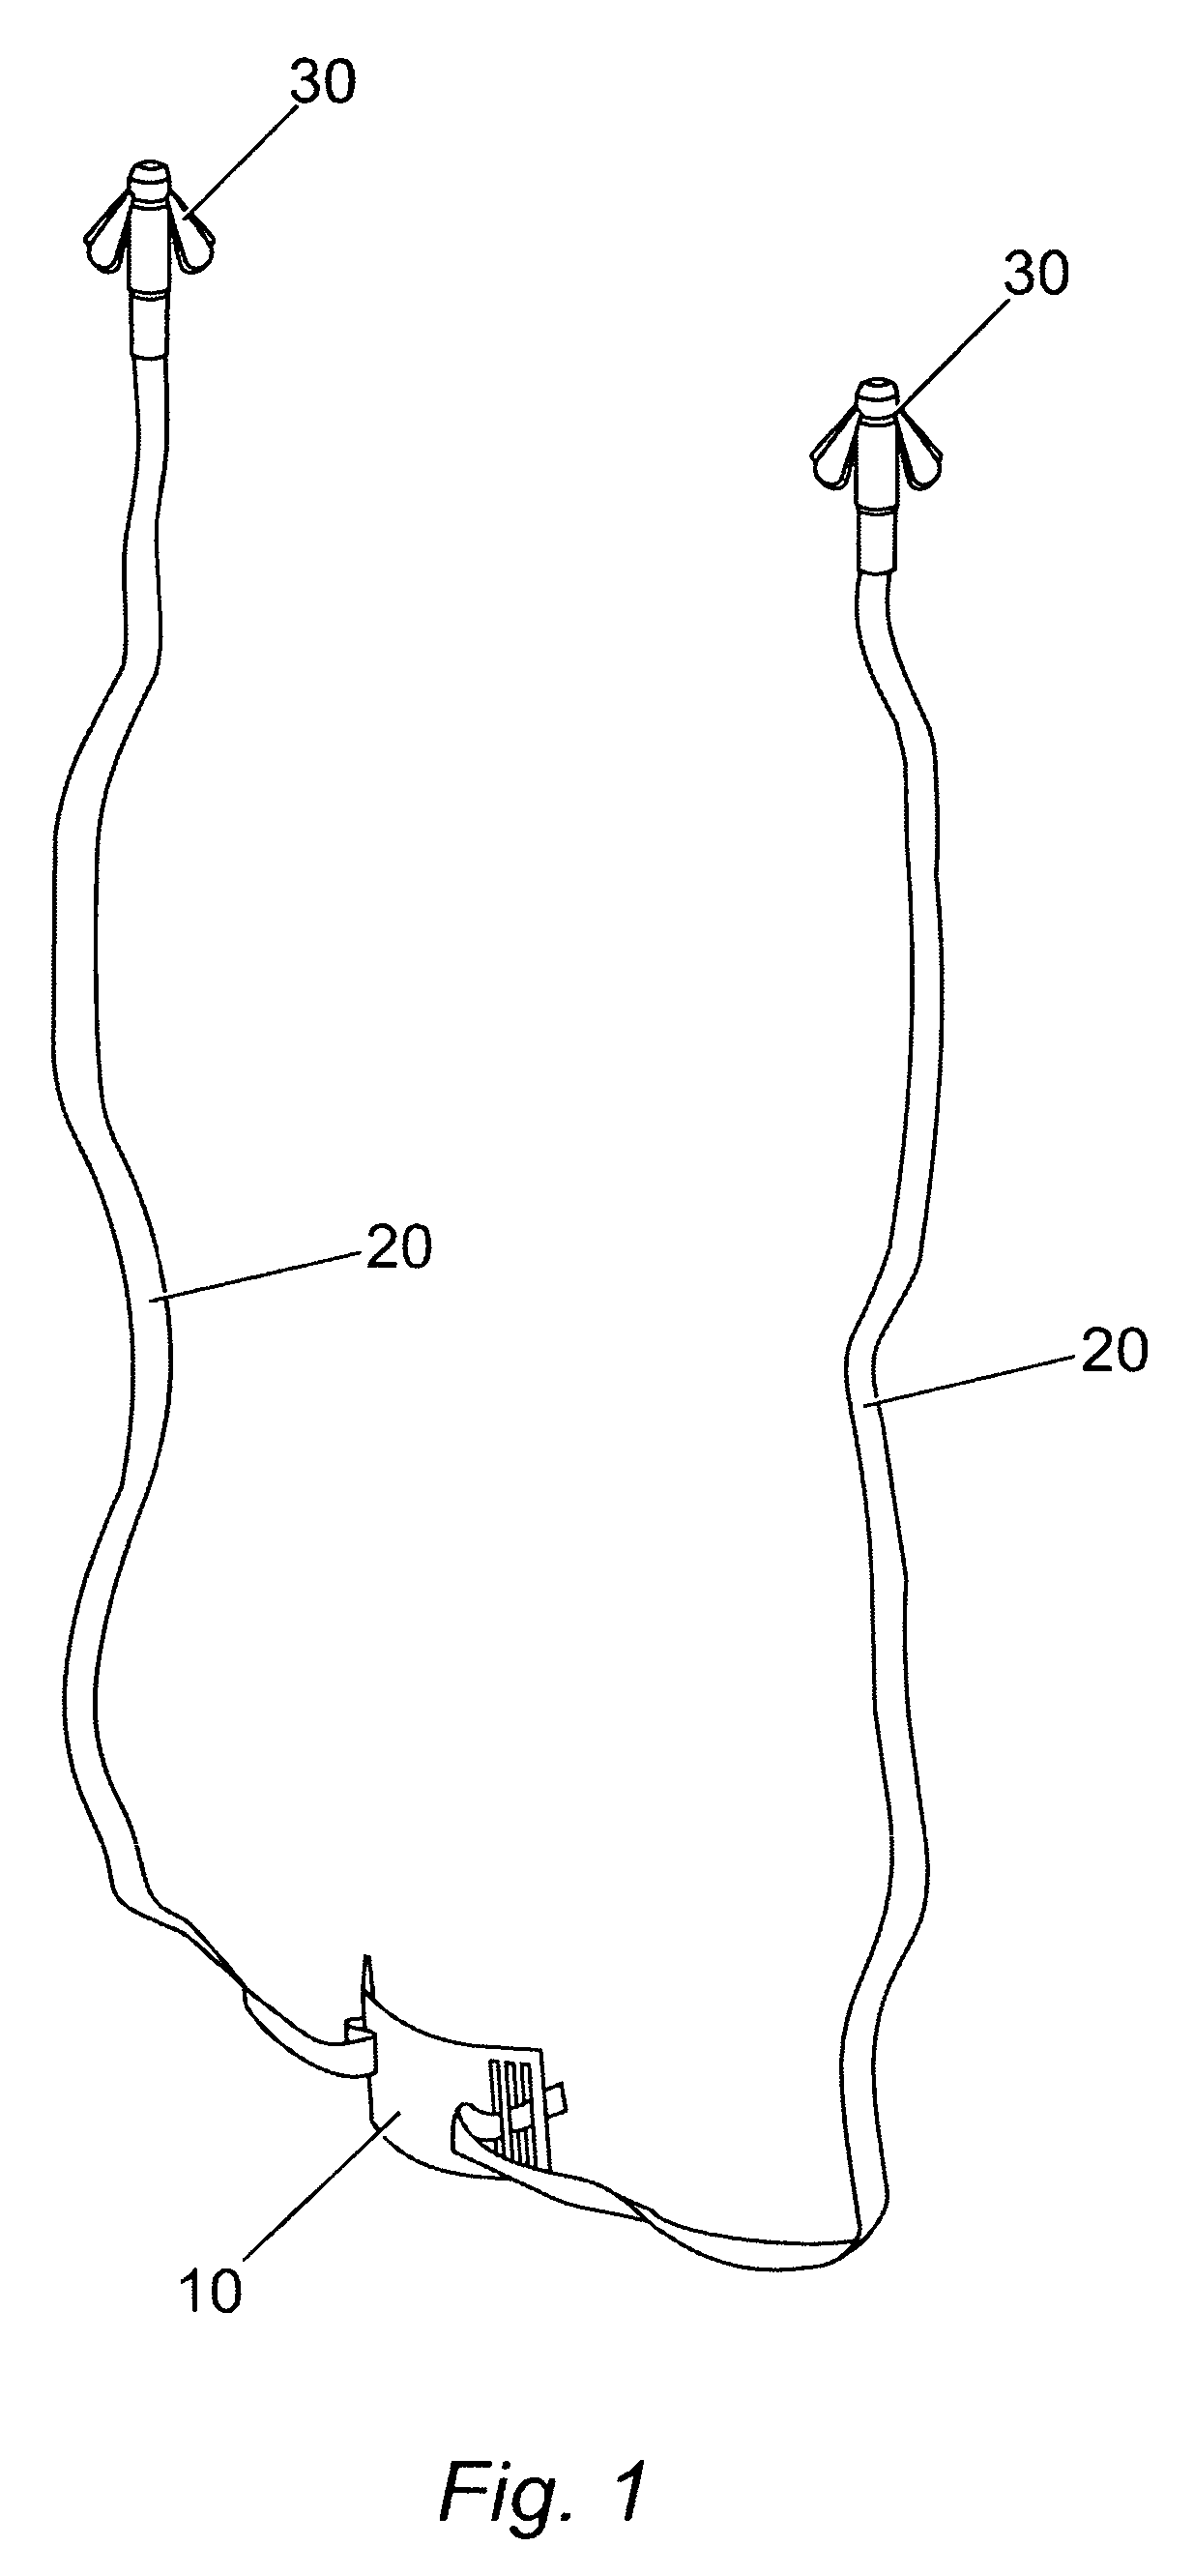 Apparatus and method for treating female urinary incontinence